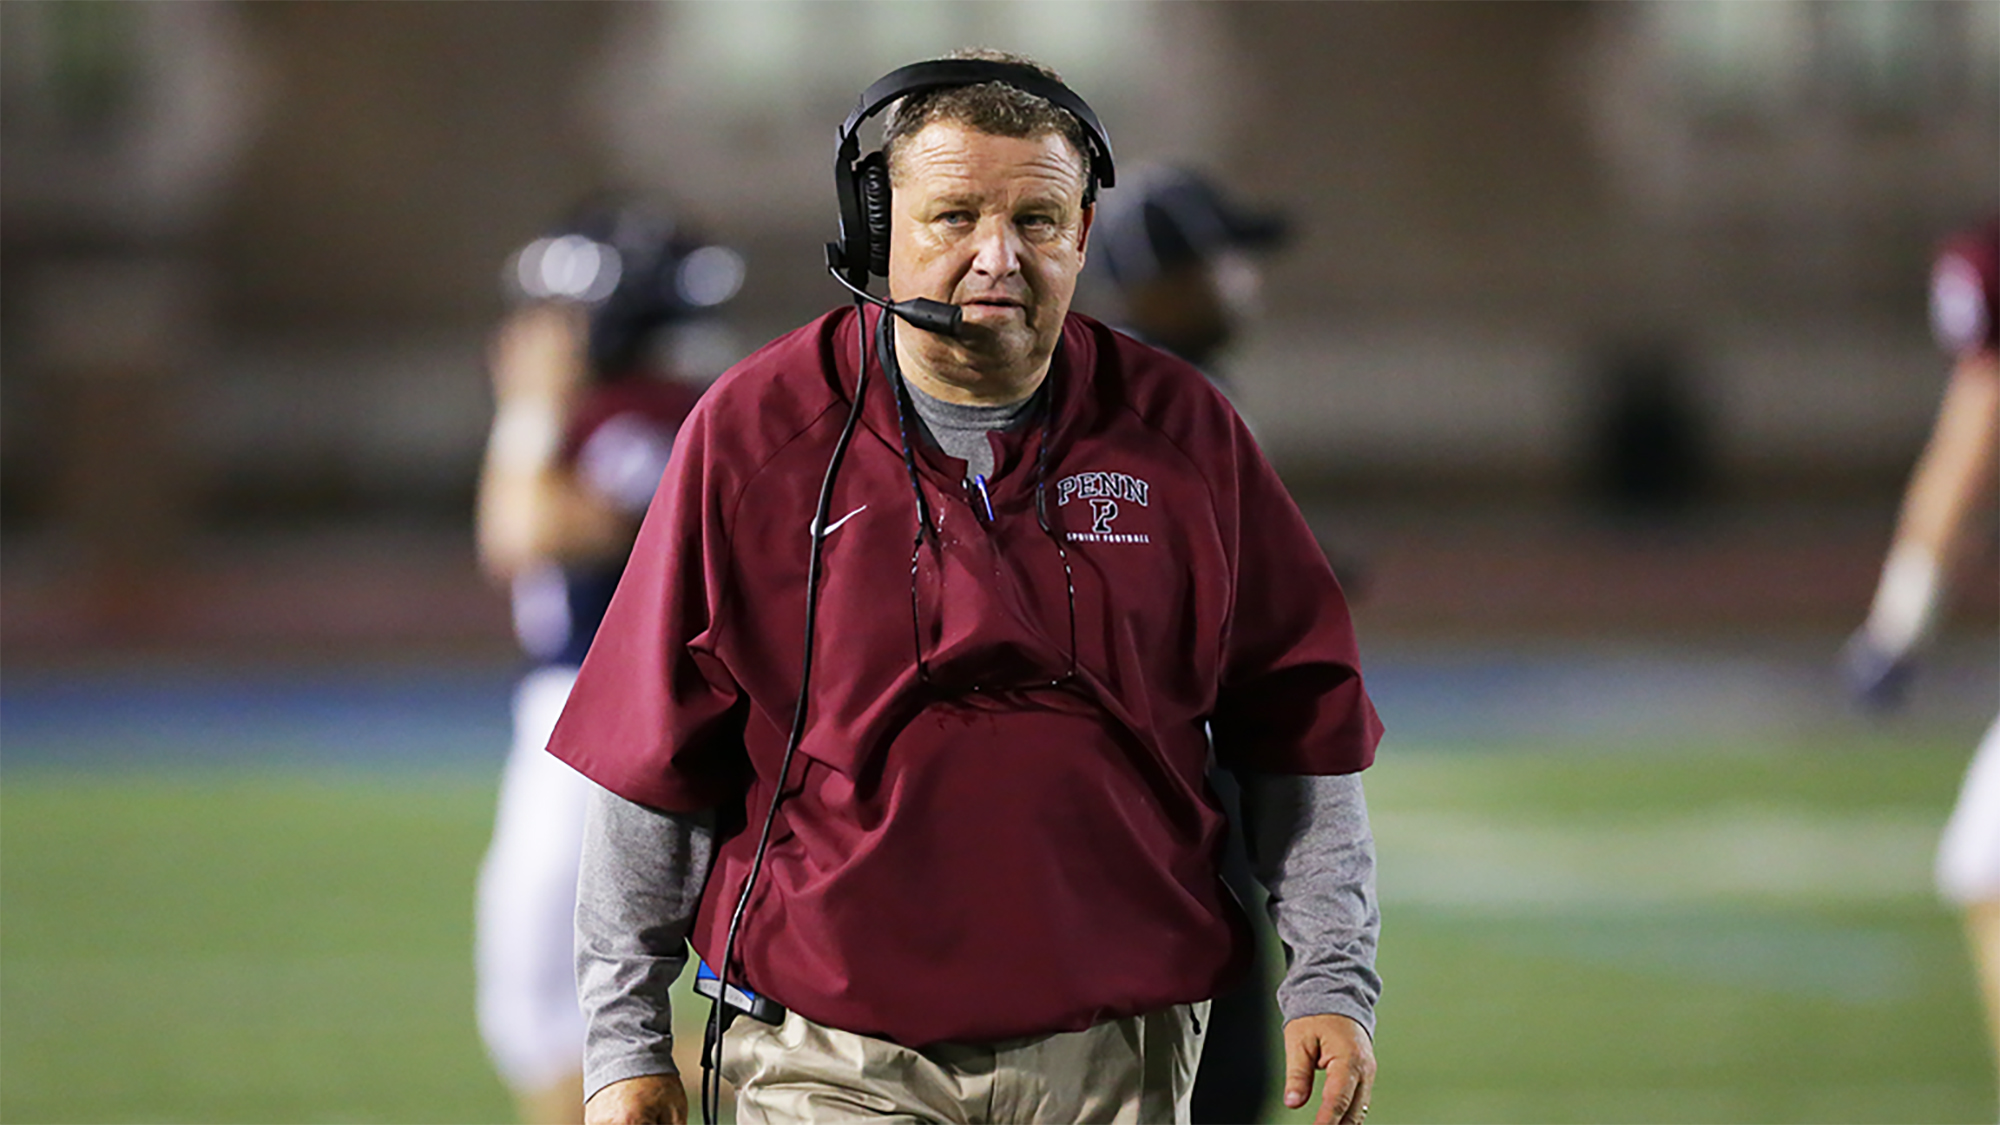 McConnell named William R. Wagner Head Coach of Sprint Football | Penn Today